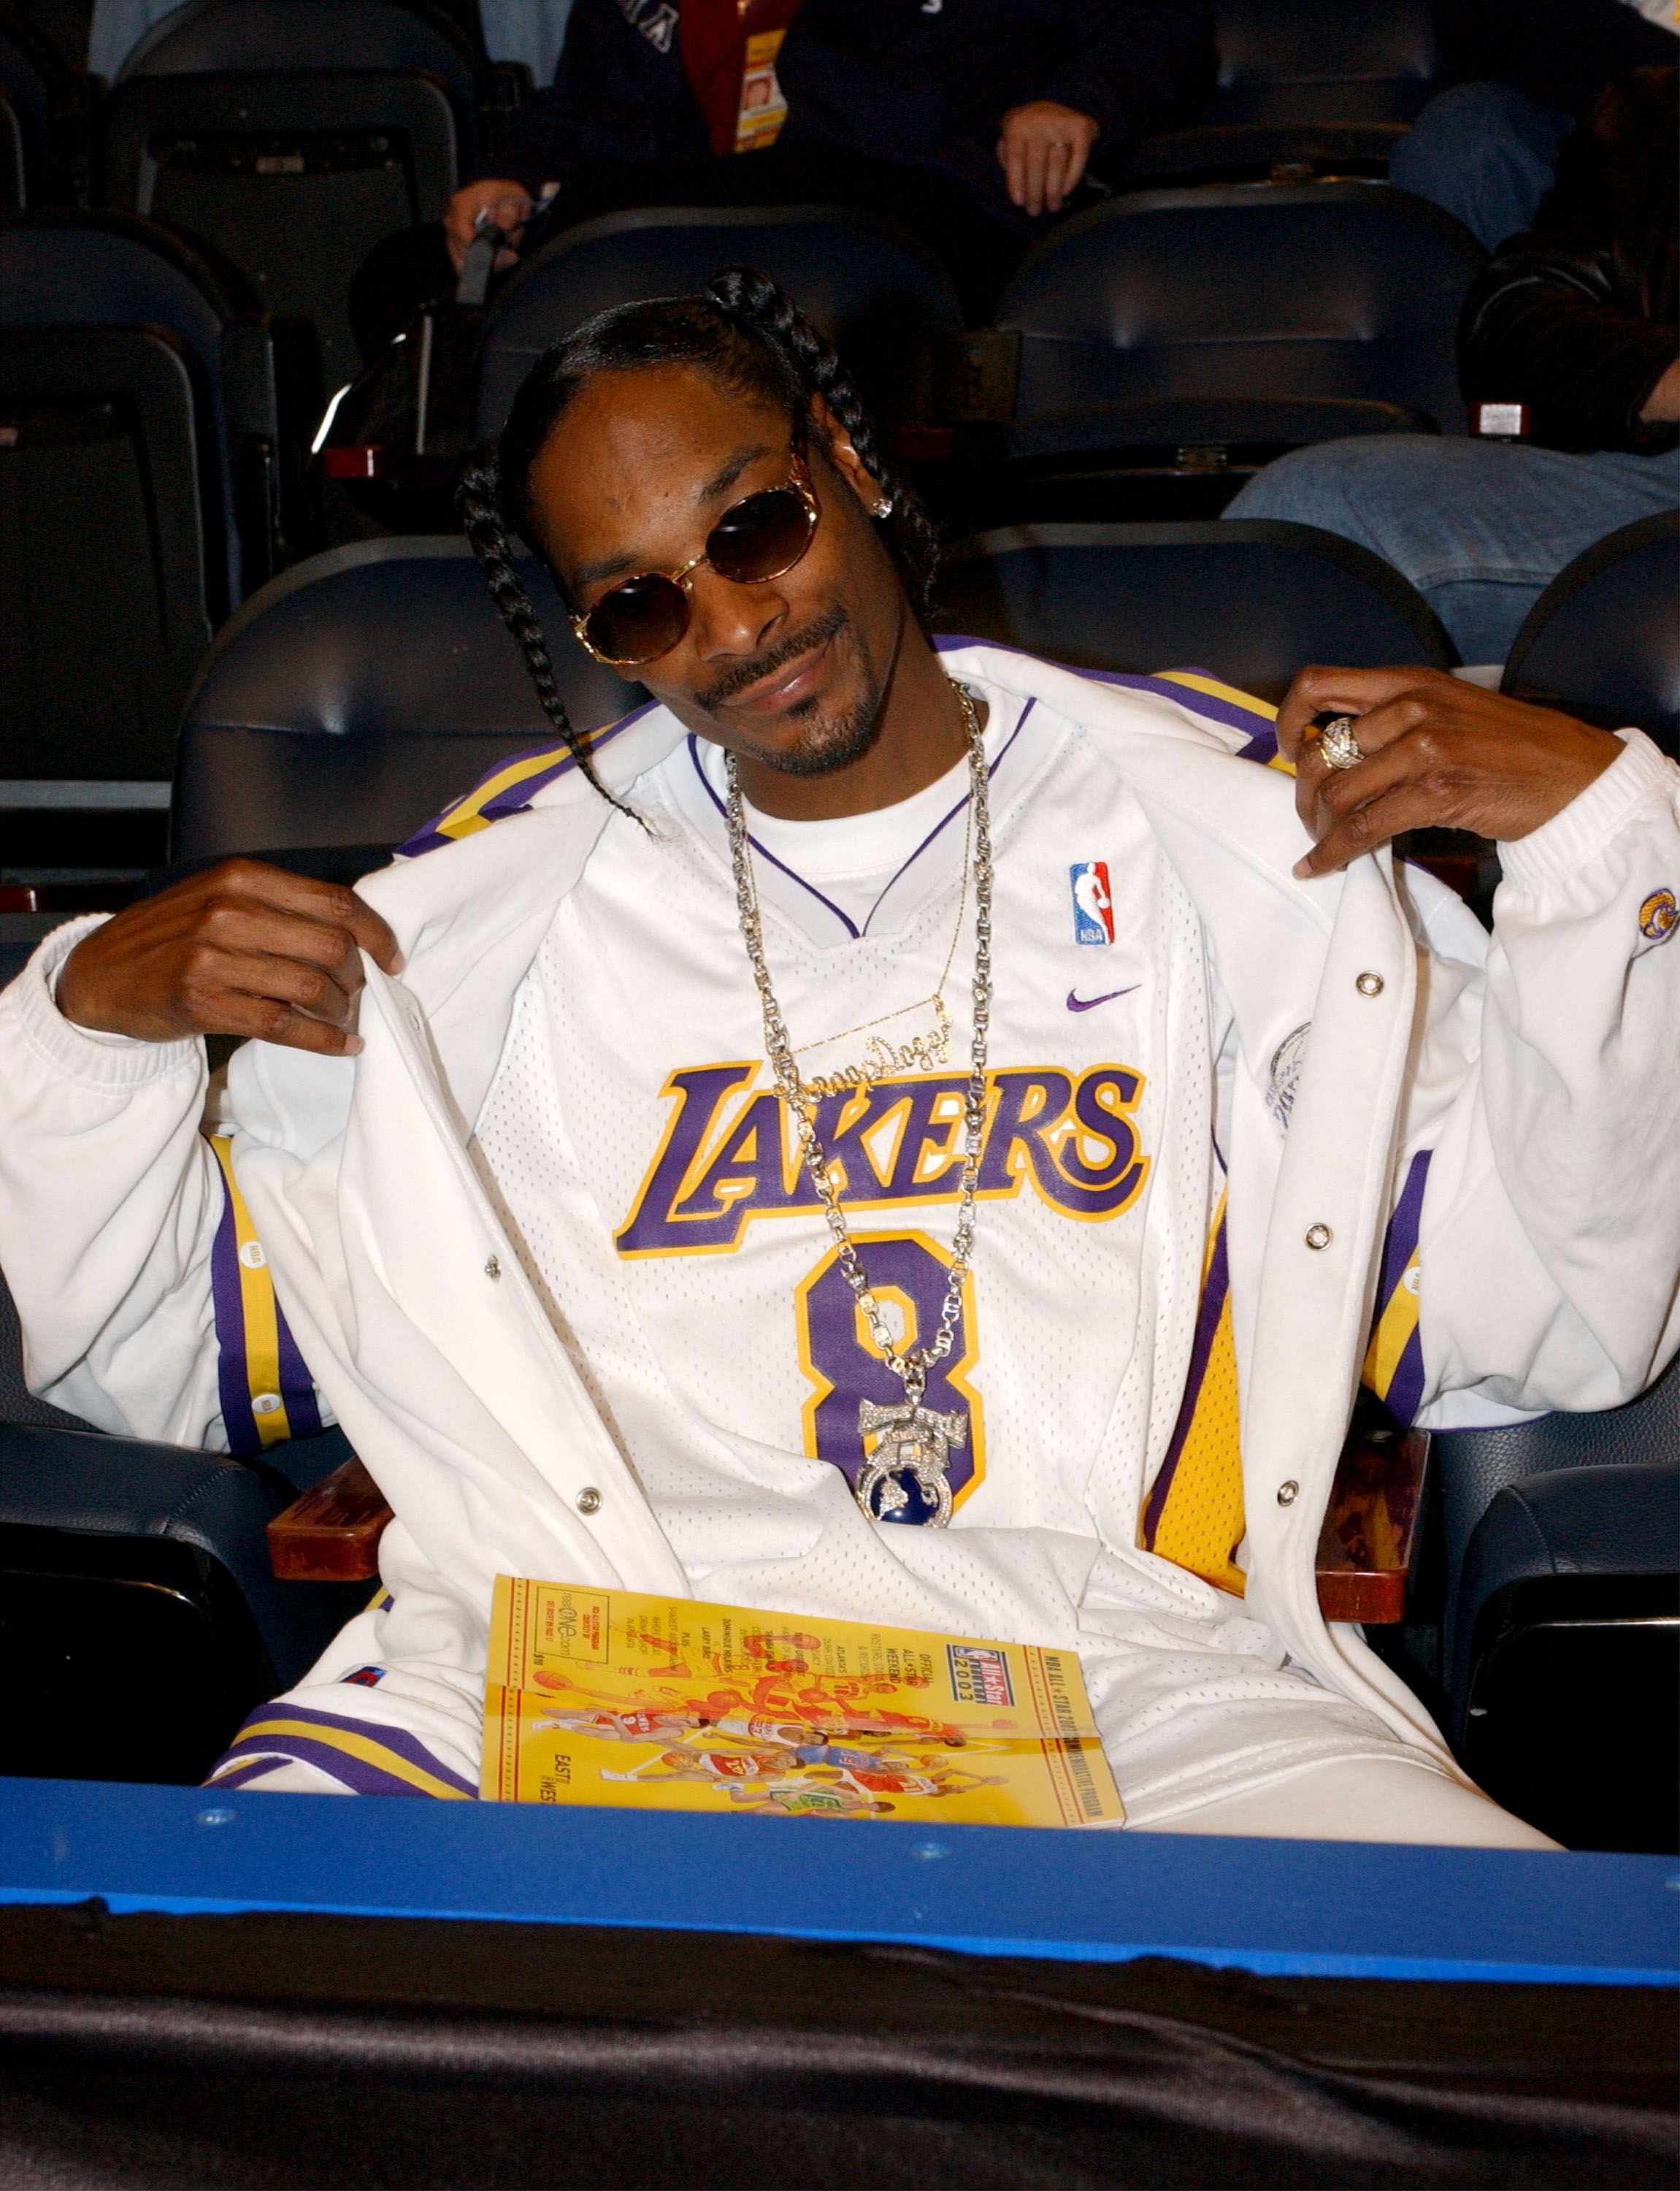 Snoop Dogg at the 2003 NBA All-Star game at the Phillips Arena February 9, 2003 in Atlanta, Georgia. | Source: Getty Images